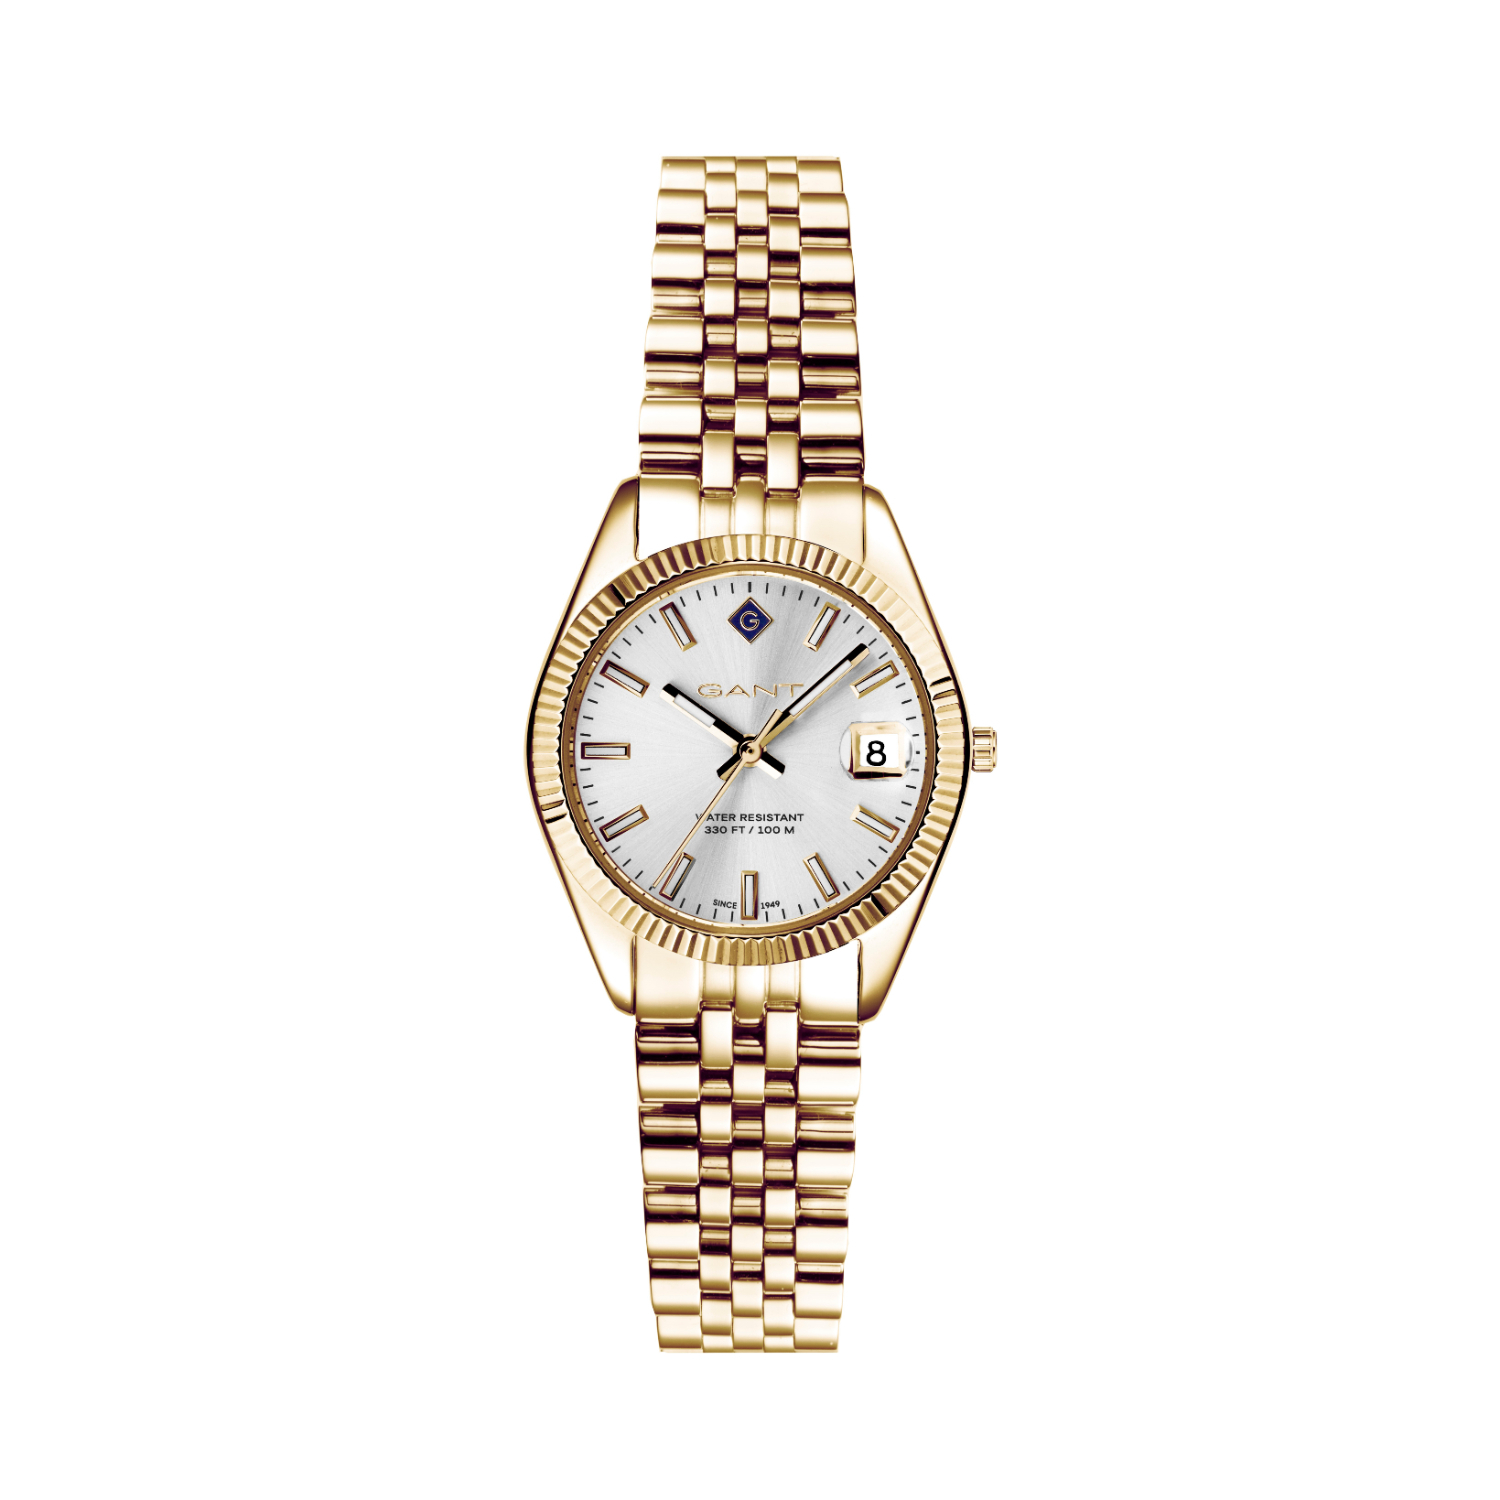 Womens Gant watch in gold stainless steel with white dial and bracelet.